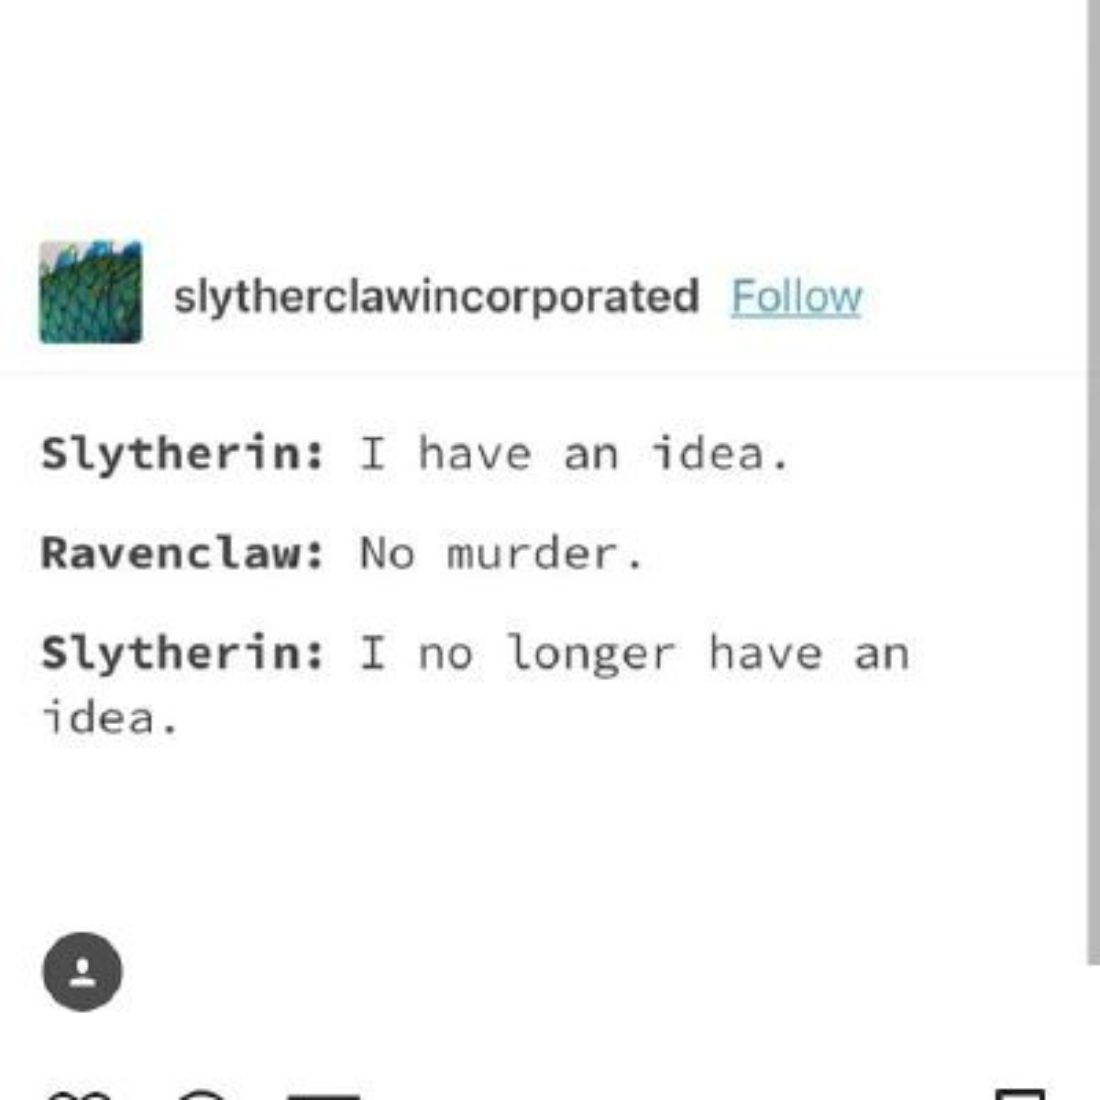 Harry Potter 10 Hilarious Slytherin Logic Memes That Are Too Funny